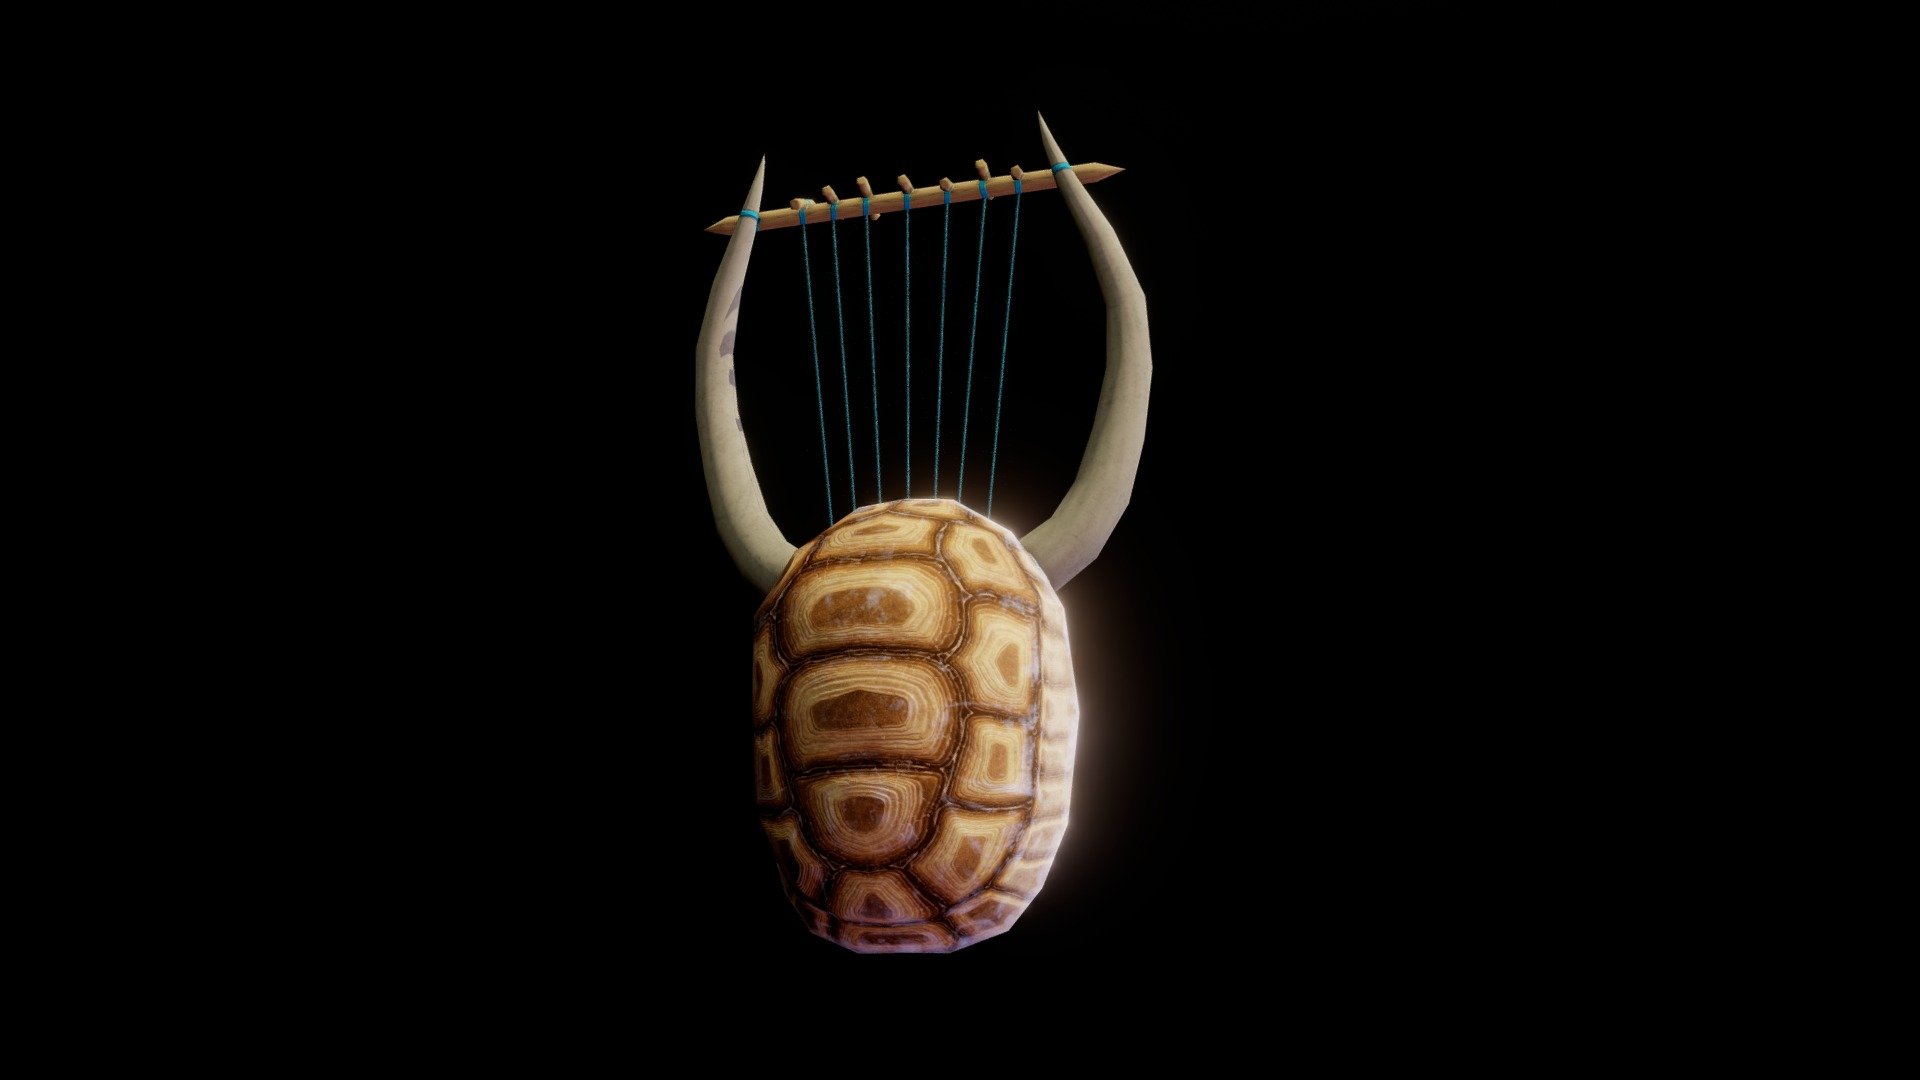 In Greek myth, Apollo was given a lyre by Hermes made from the shell of a tortoise. This is my imagining of that lyre 3d model